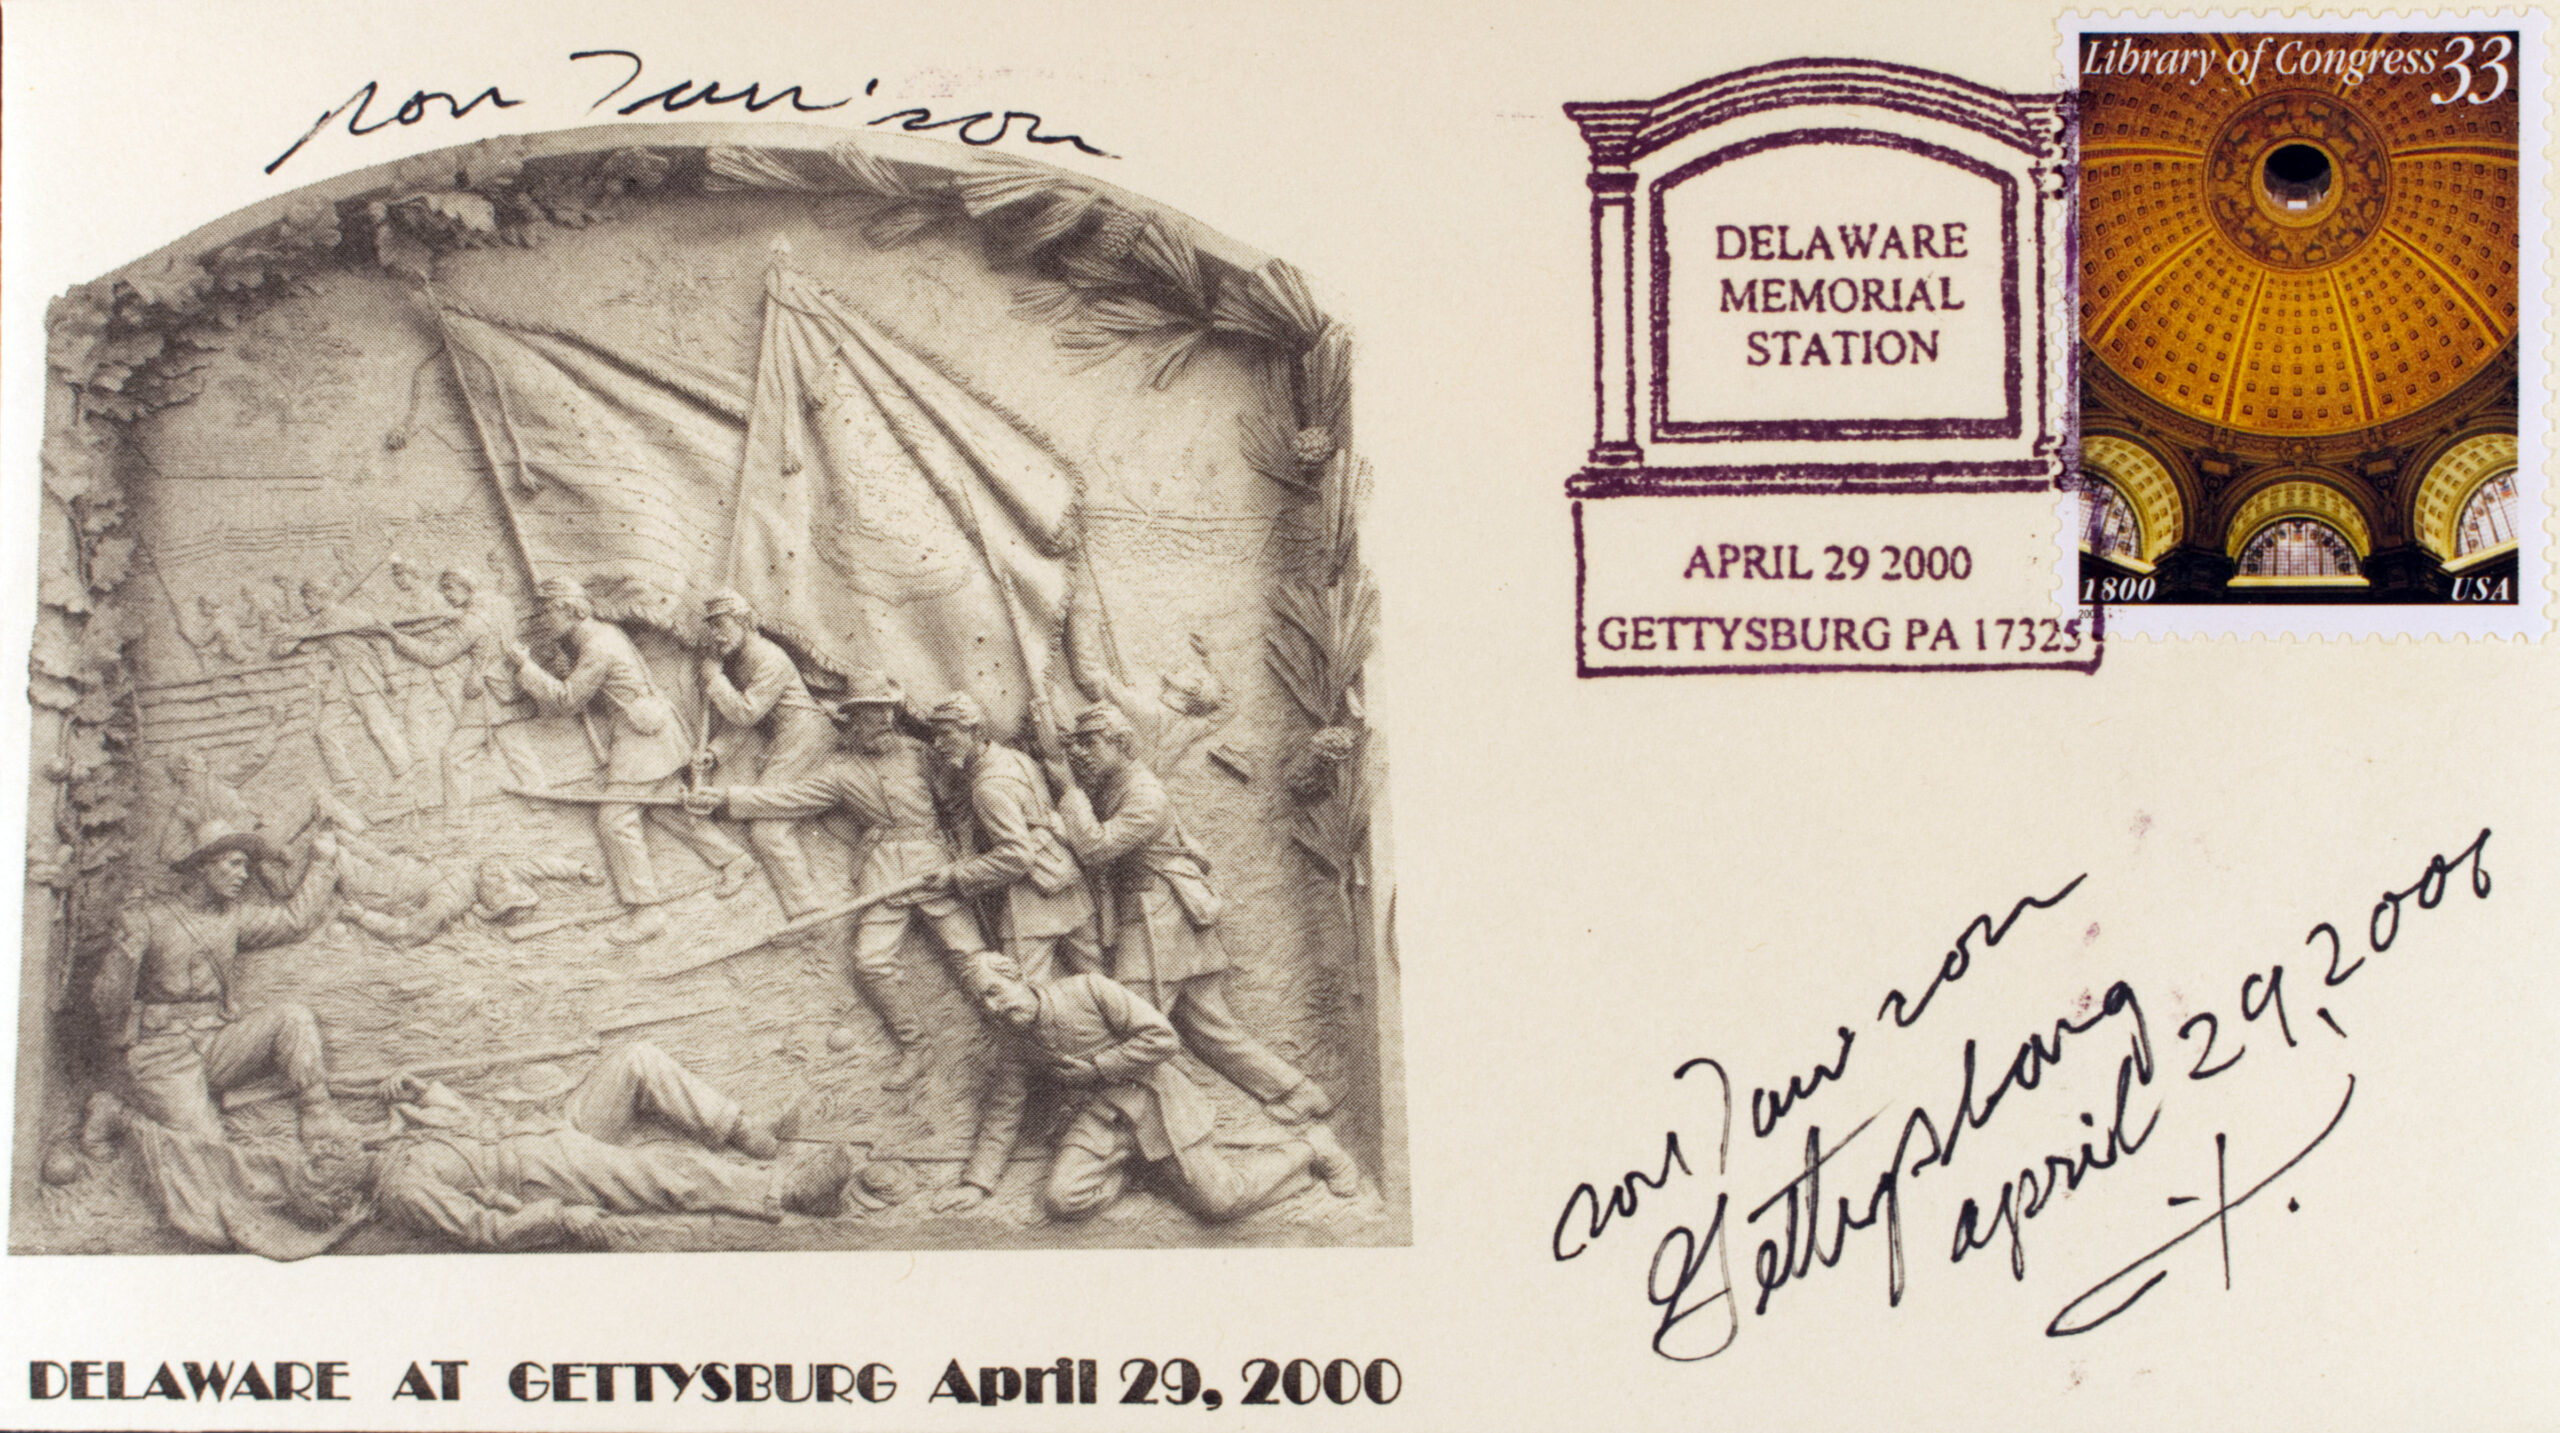 Delaware at Gettysburg, April 29, 2000. Envelope with postal cancellation marked “Delaware Memorial Station, April 29, 2000, Gettysburg PA 17325.” Library of Congress 33 cent postage stamp. Signed by the sculptor Ron Tunison.